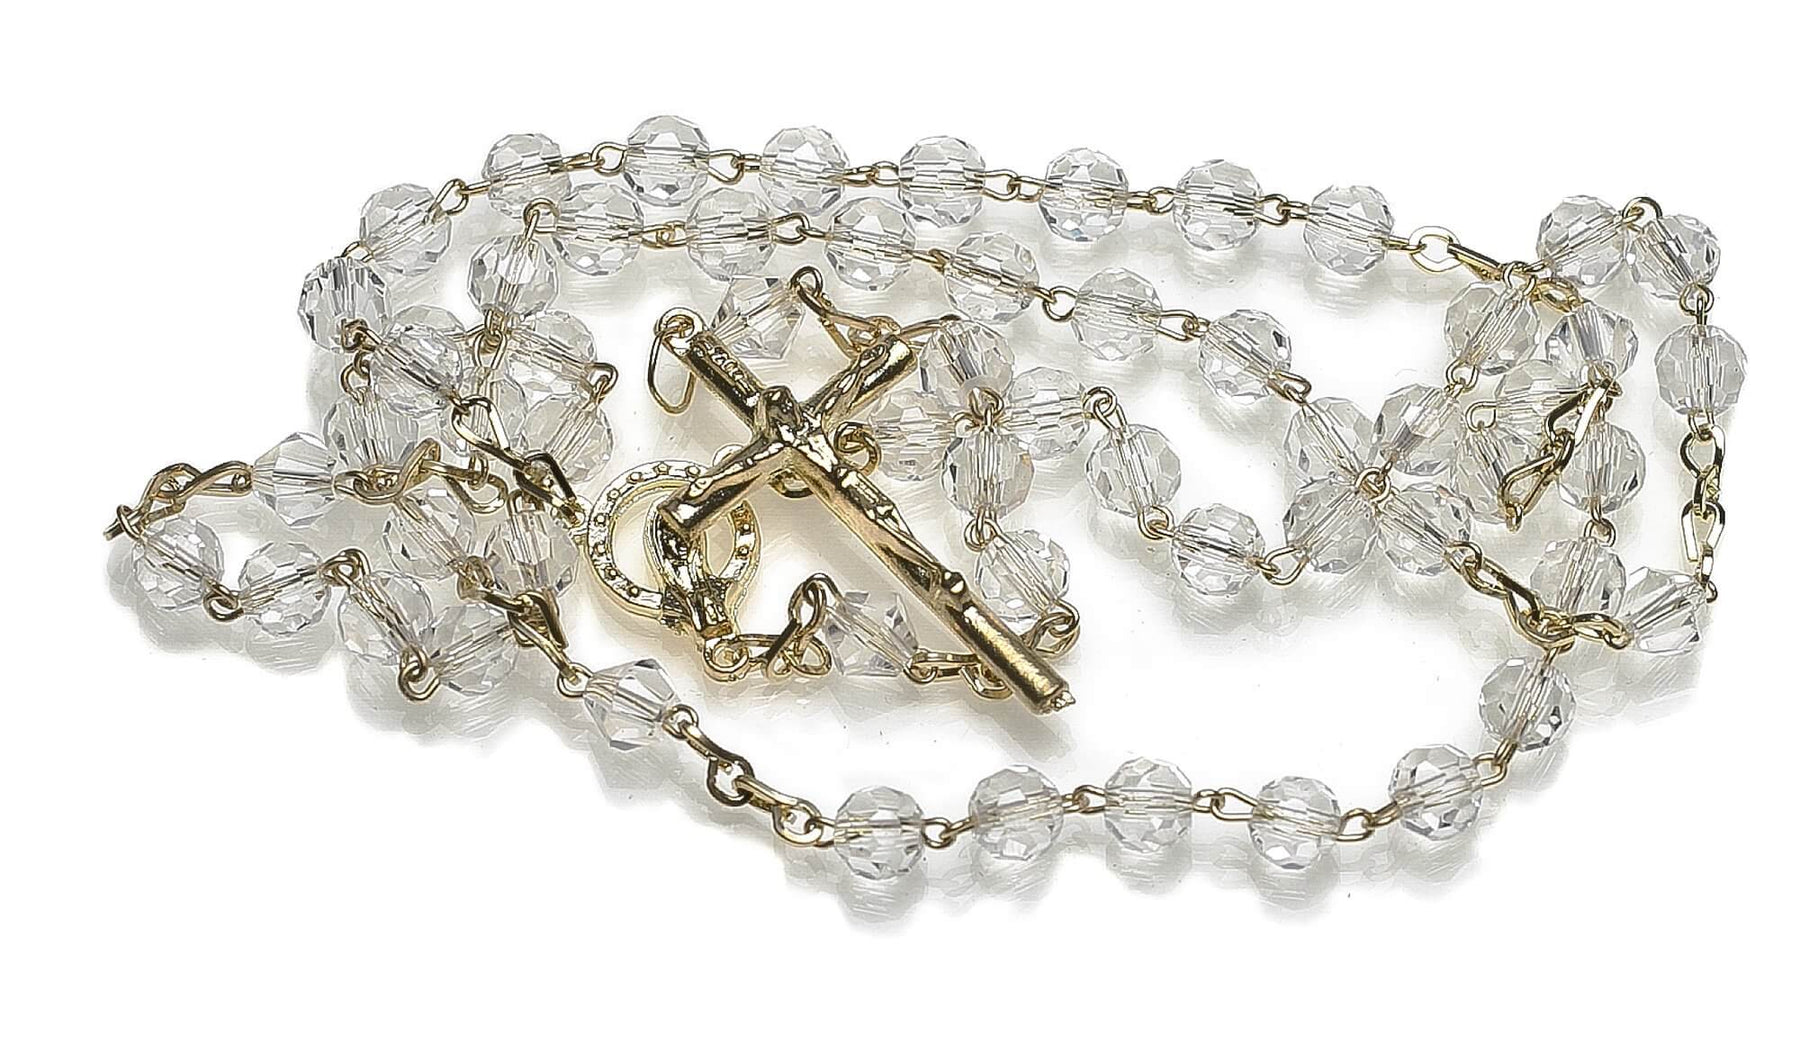 Handcrafted pearl rosary in its standard Fifteen Mysteries of the traditional Rosary. This item was designed based on the long-standing custom that was established by Pope Pius V in the 16th century and is available in gold or silver.